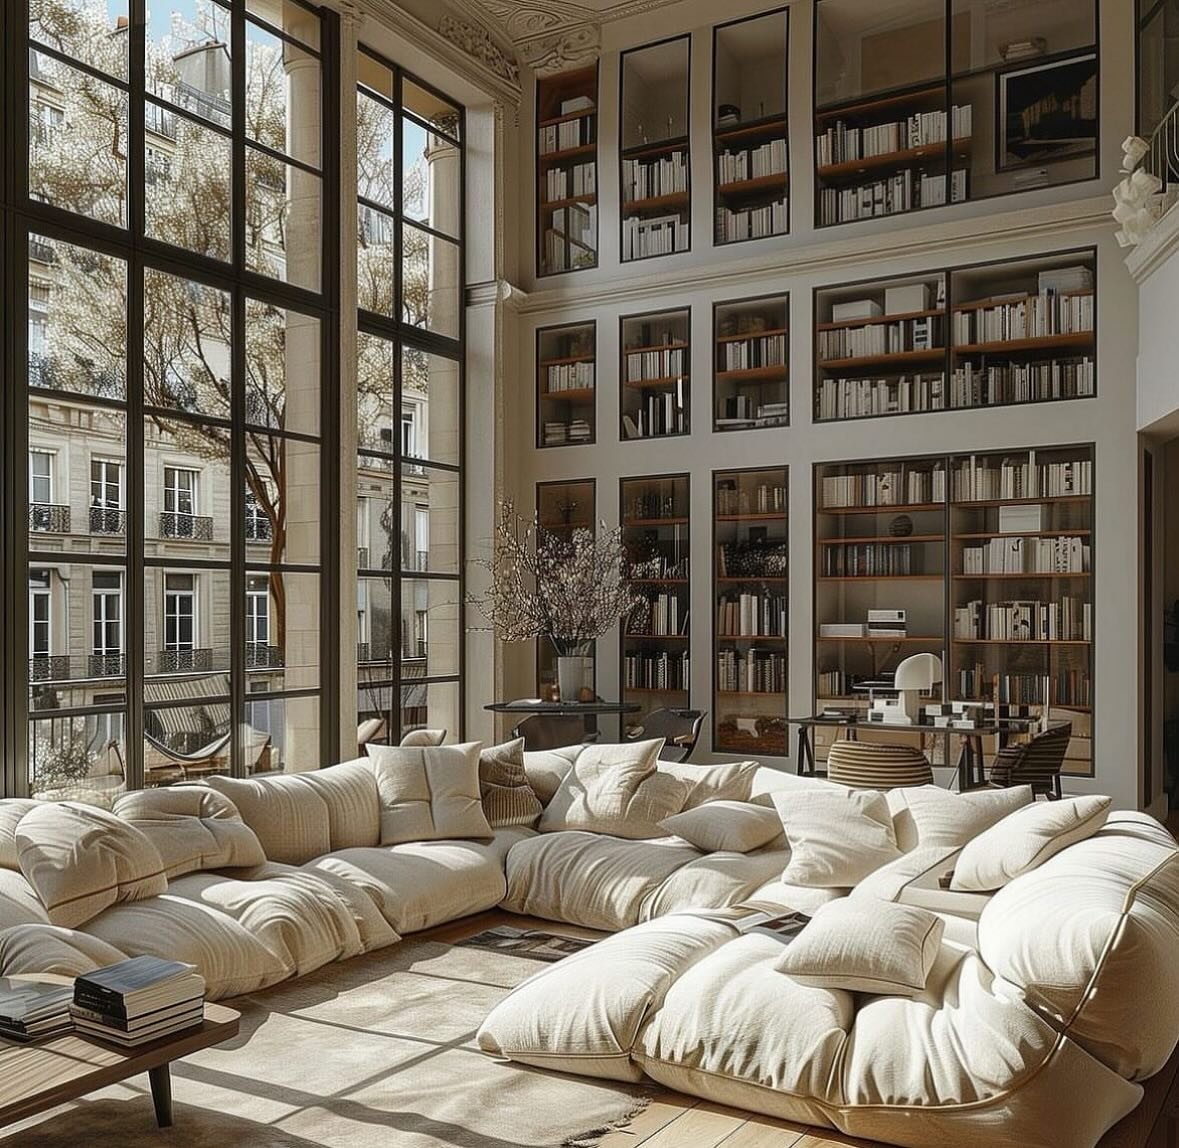 Current mood: big bright living room, comfy couch and shelves filled with books!

AI and all it is still pretty! 

🖤

#interiordesign #interiordesigner #architect #architecture #AIdesign #AIinteriordesign #livingroomdesign #residentialdesign #luxury